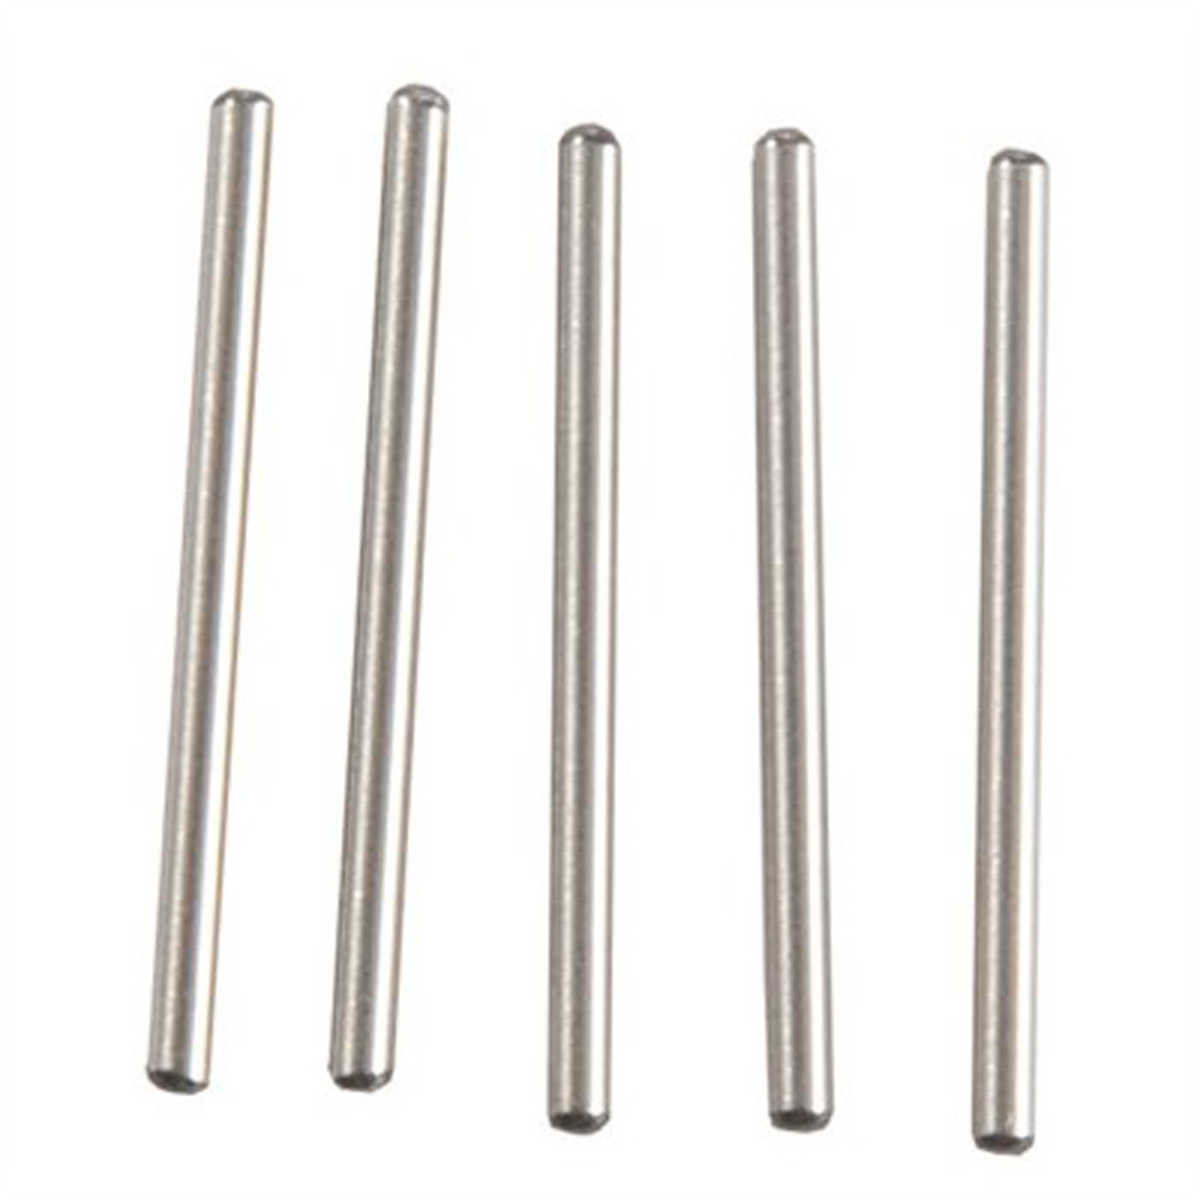 RCBS Decapping Pins (Small, 5 Count)